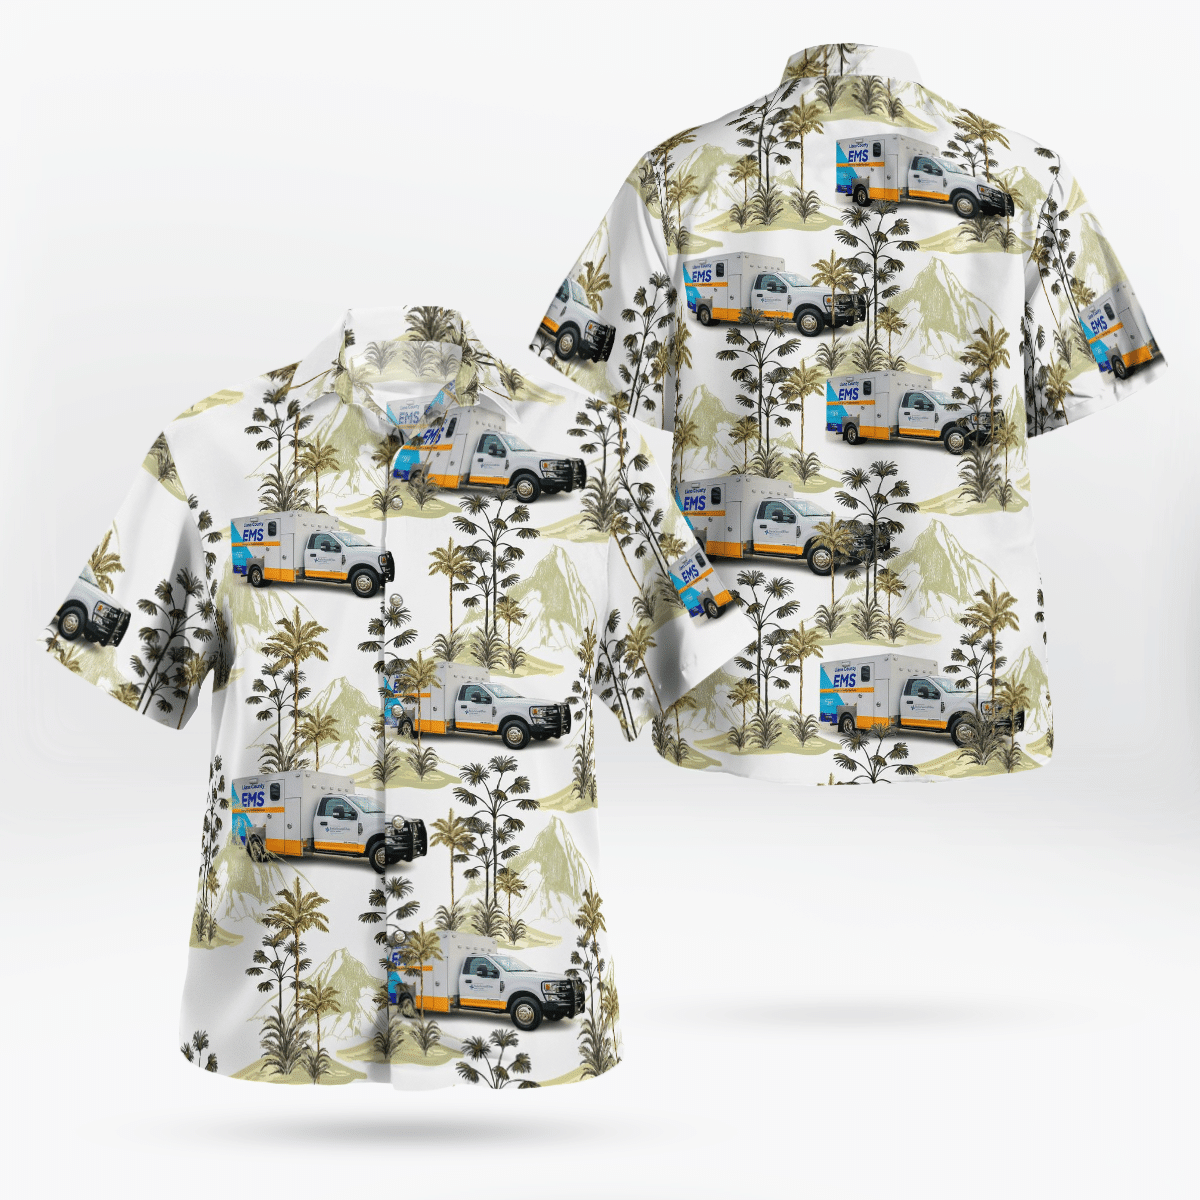 Shop now to find the perfect Hawaii Shirt for your hobby 10